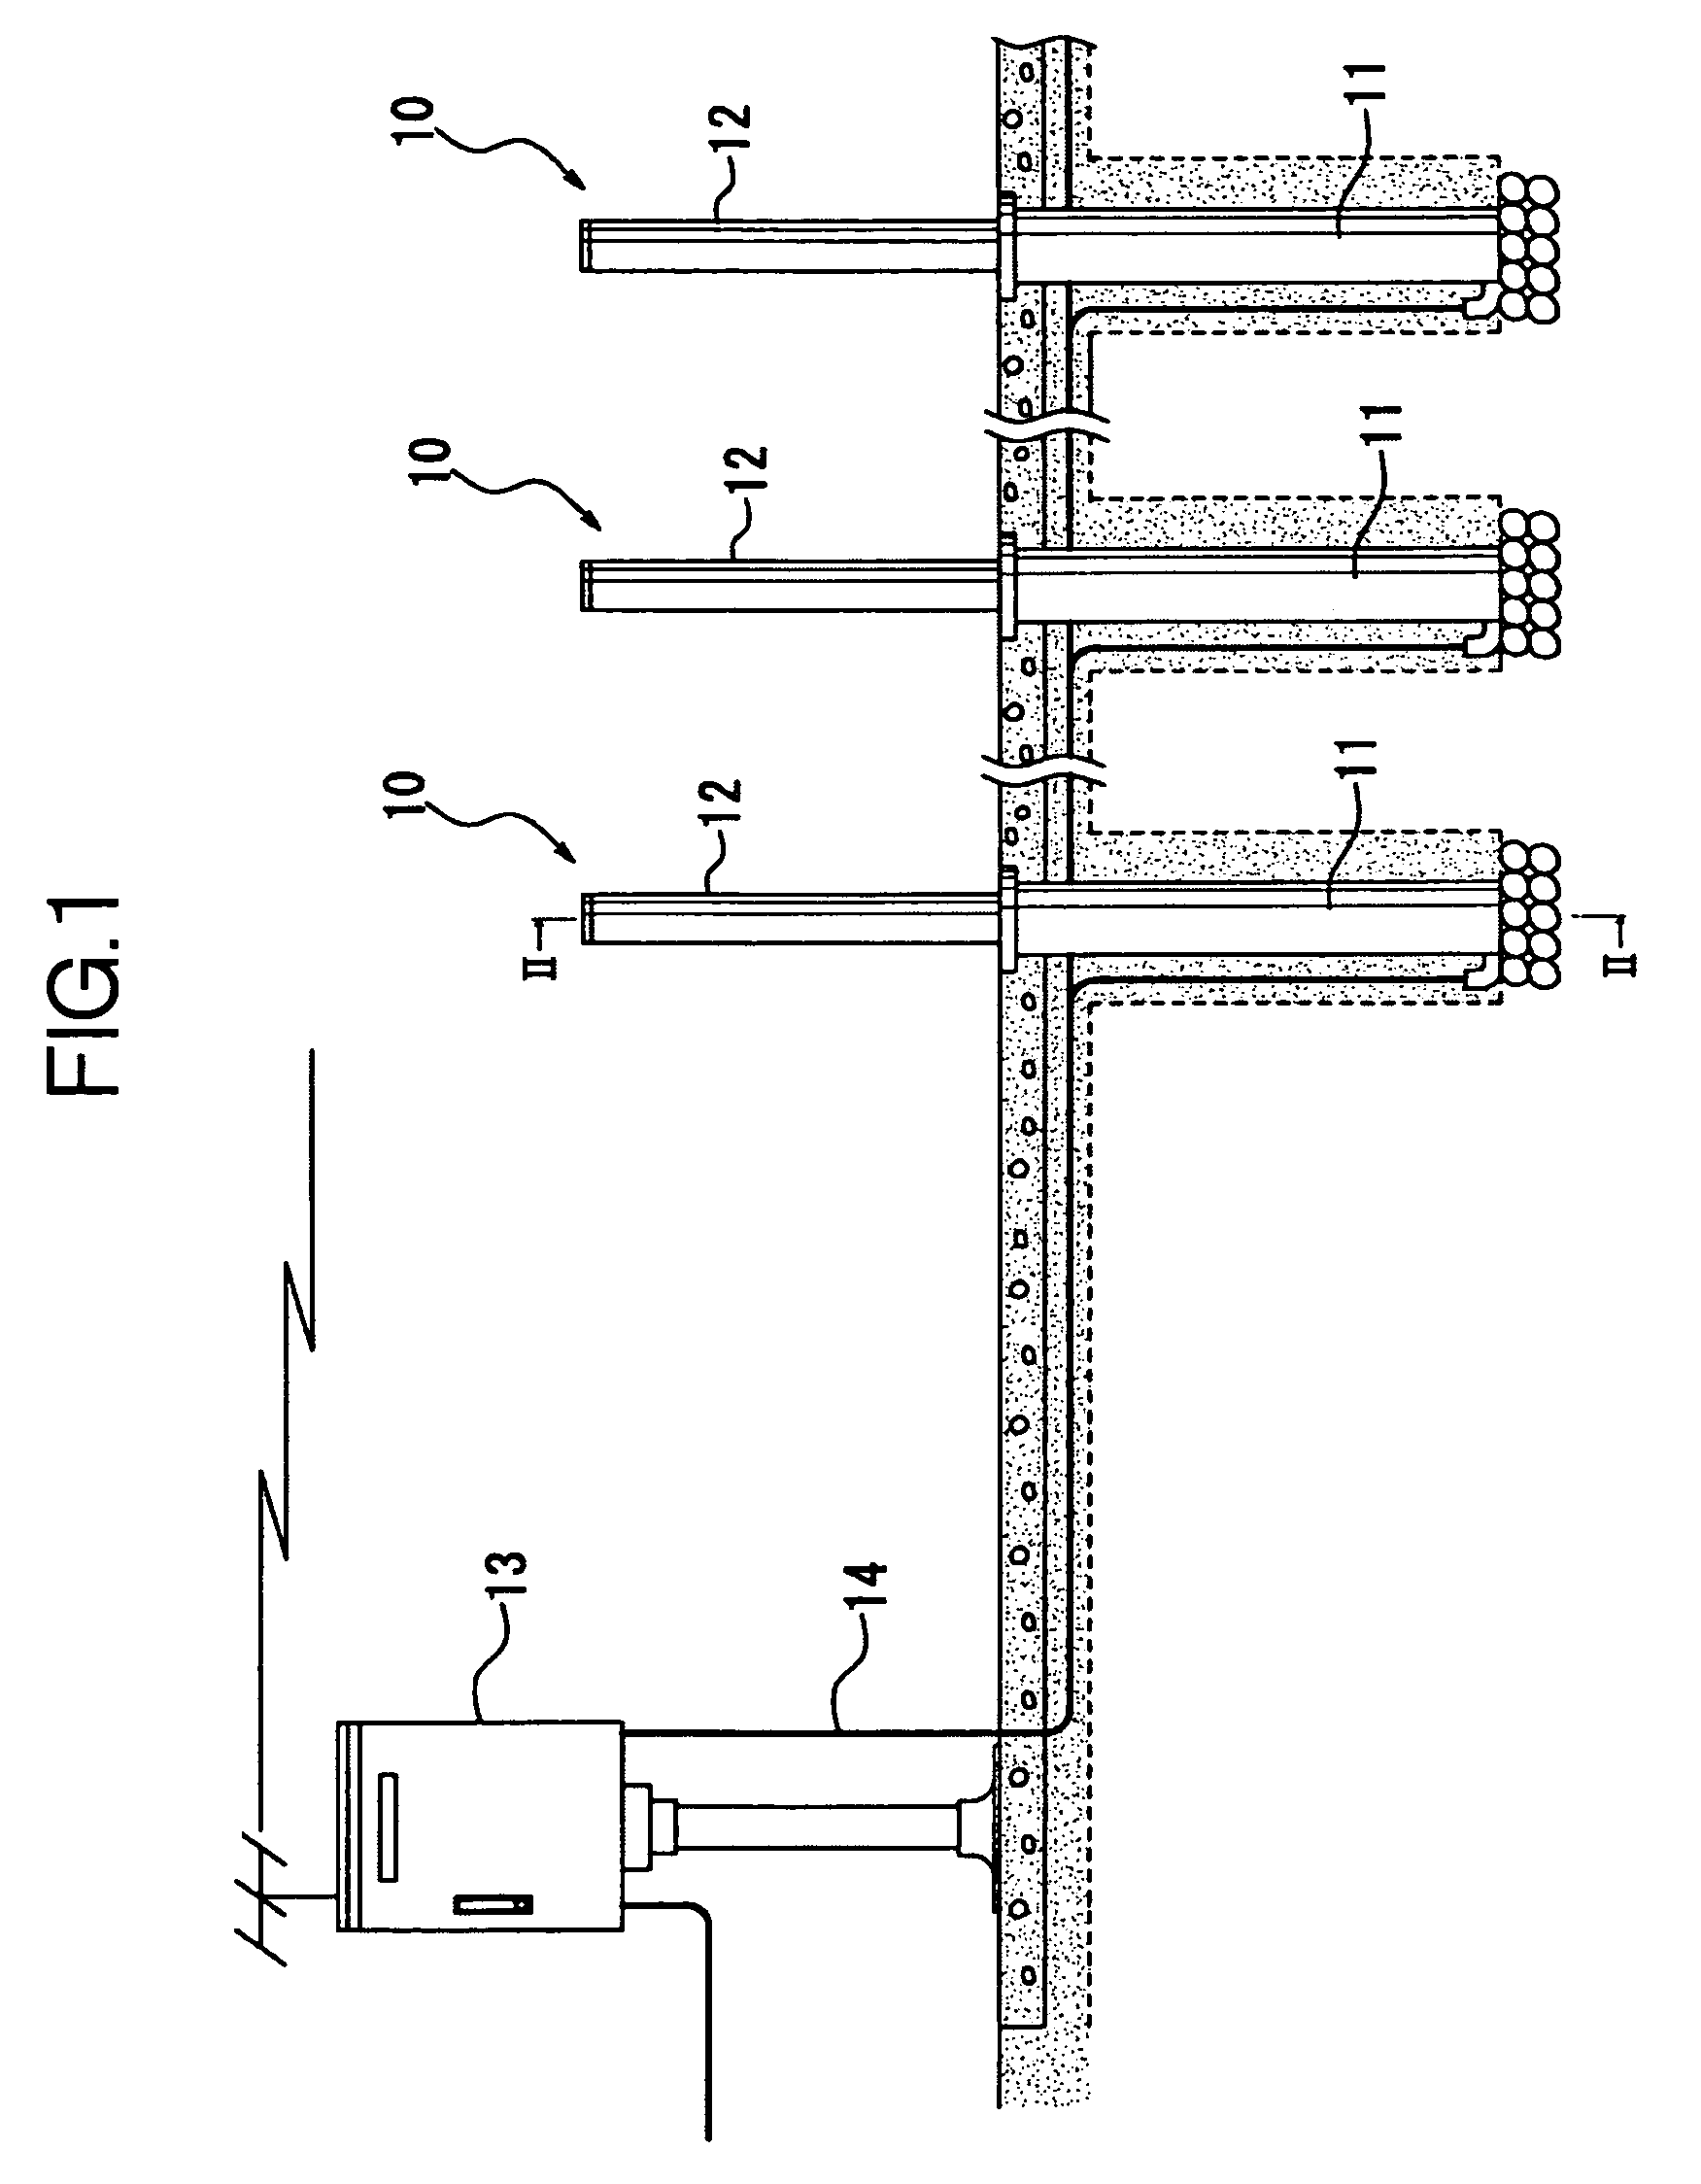 Lifting pole apparatus for traffic control